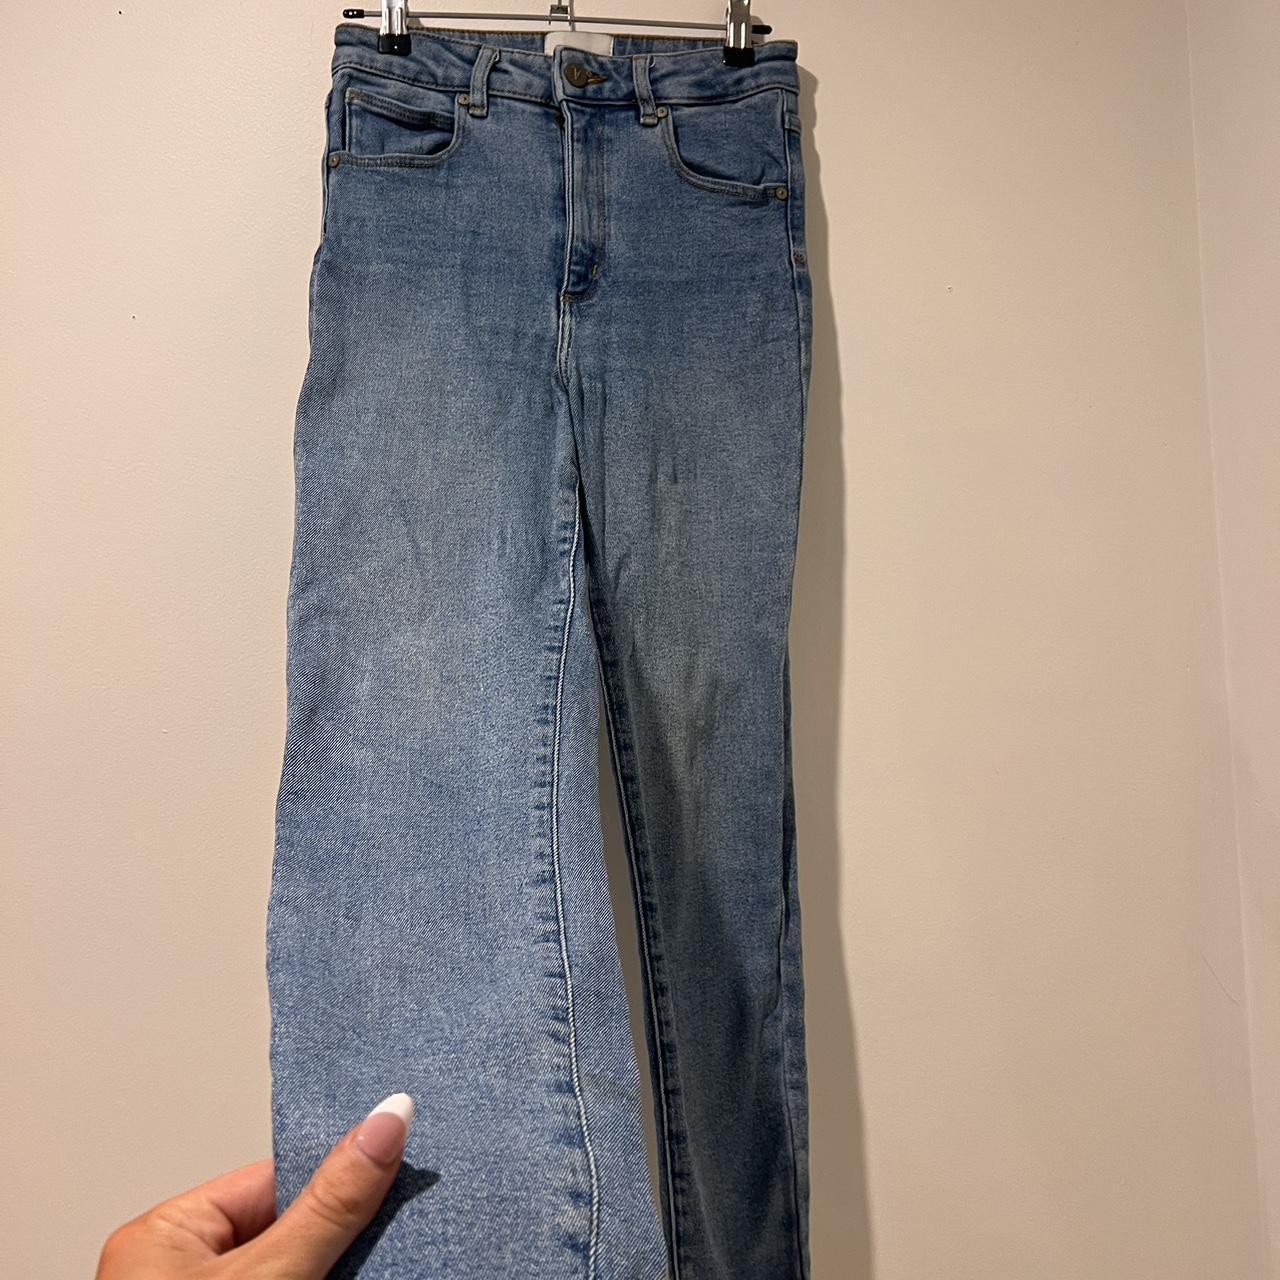 Abrand jeans. You'll love - Depop